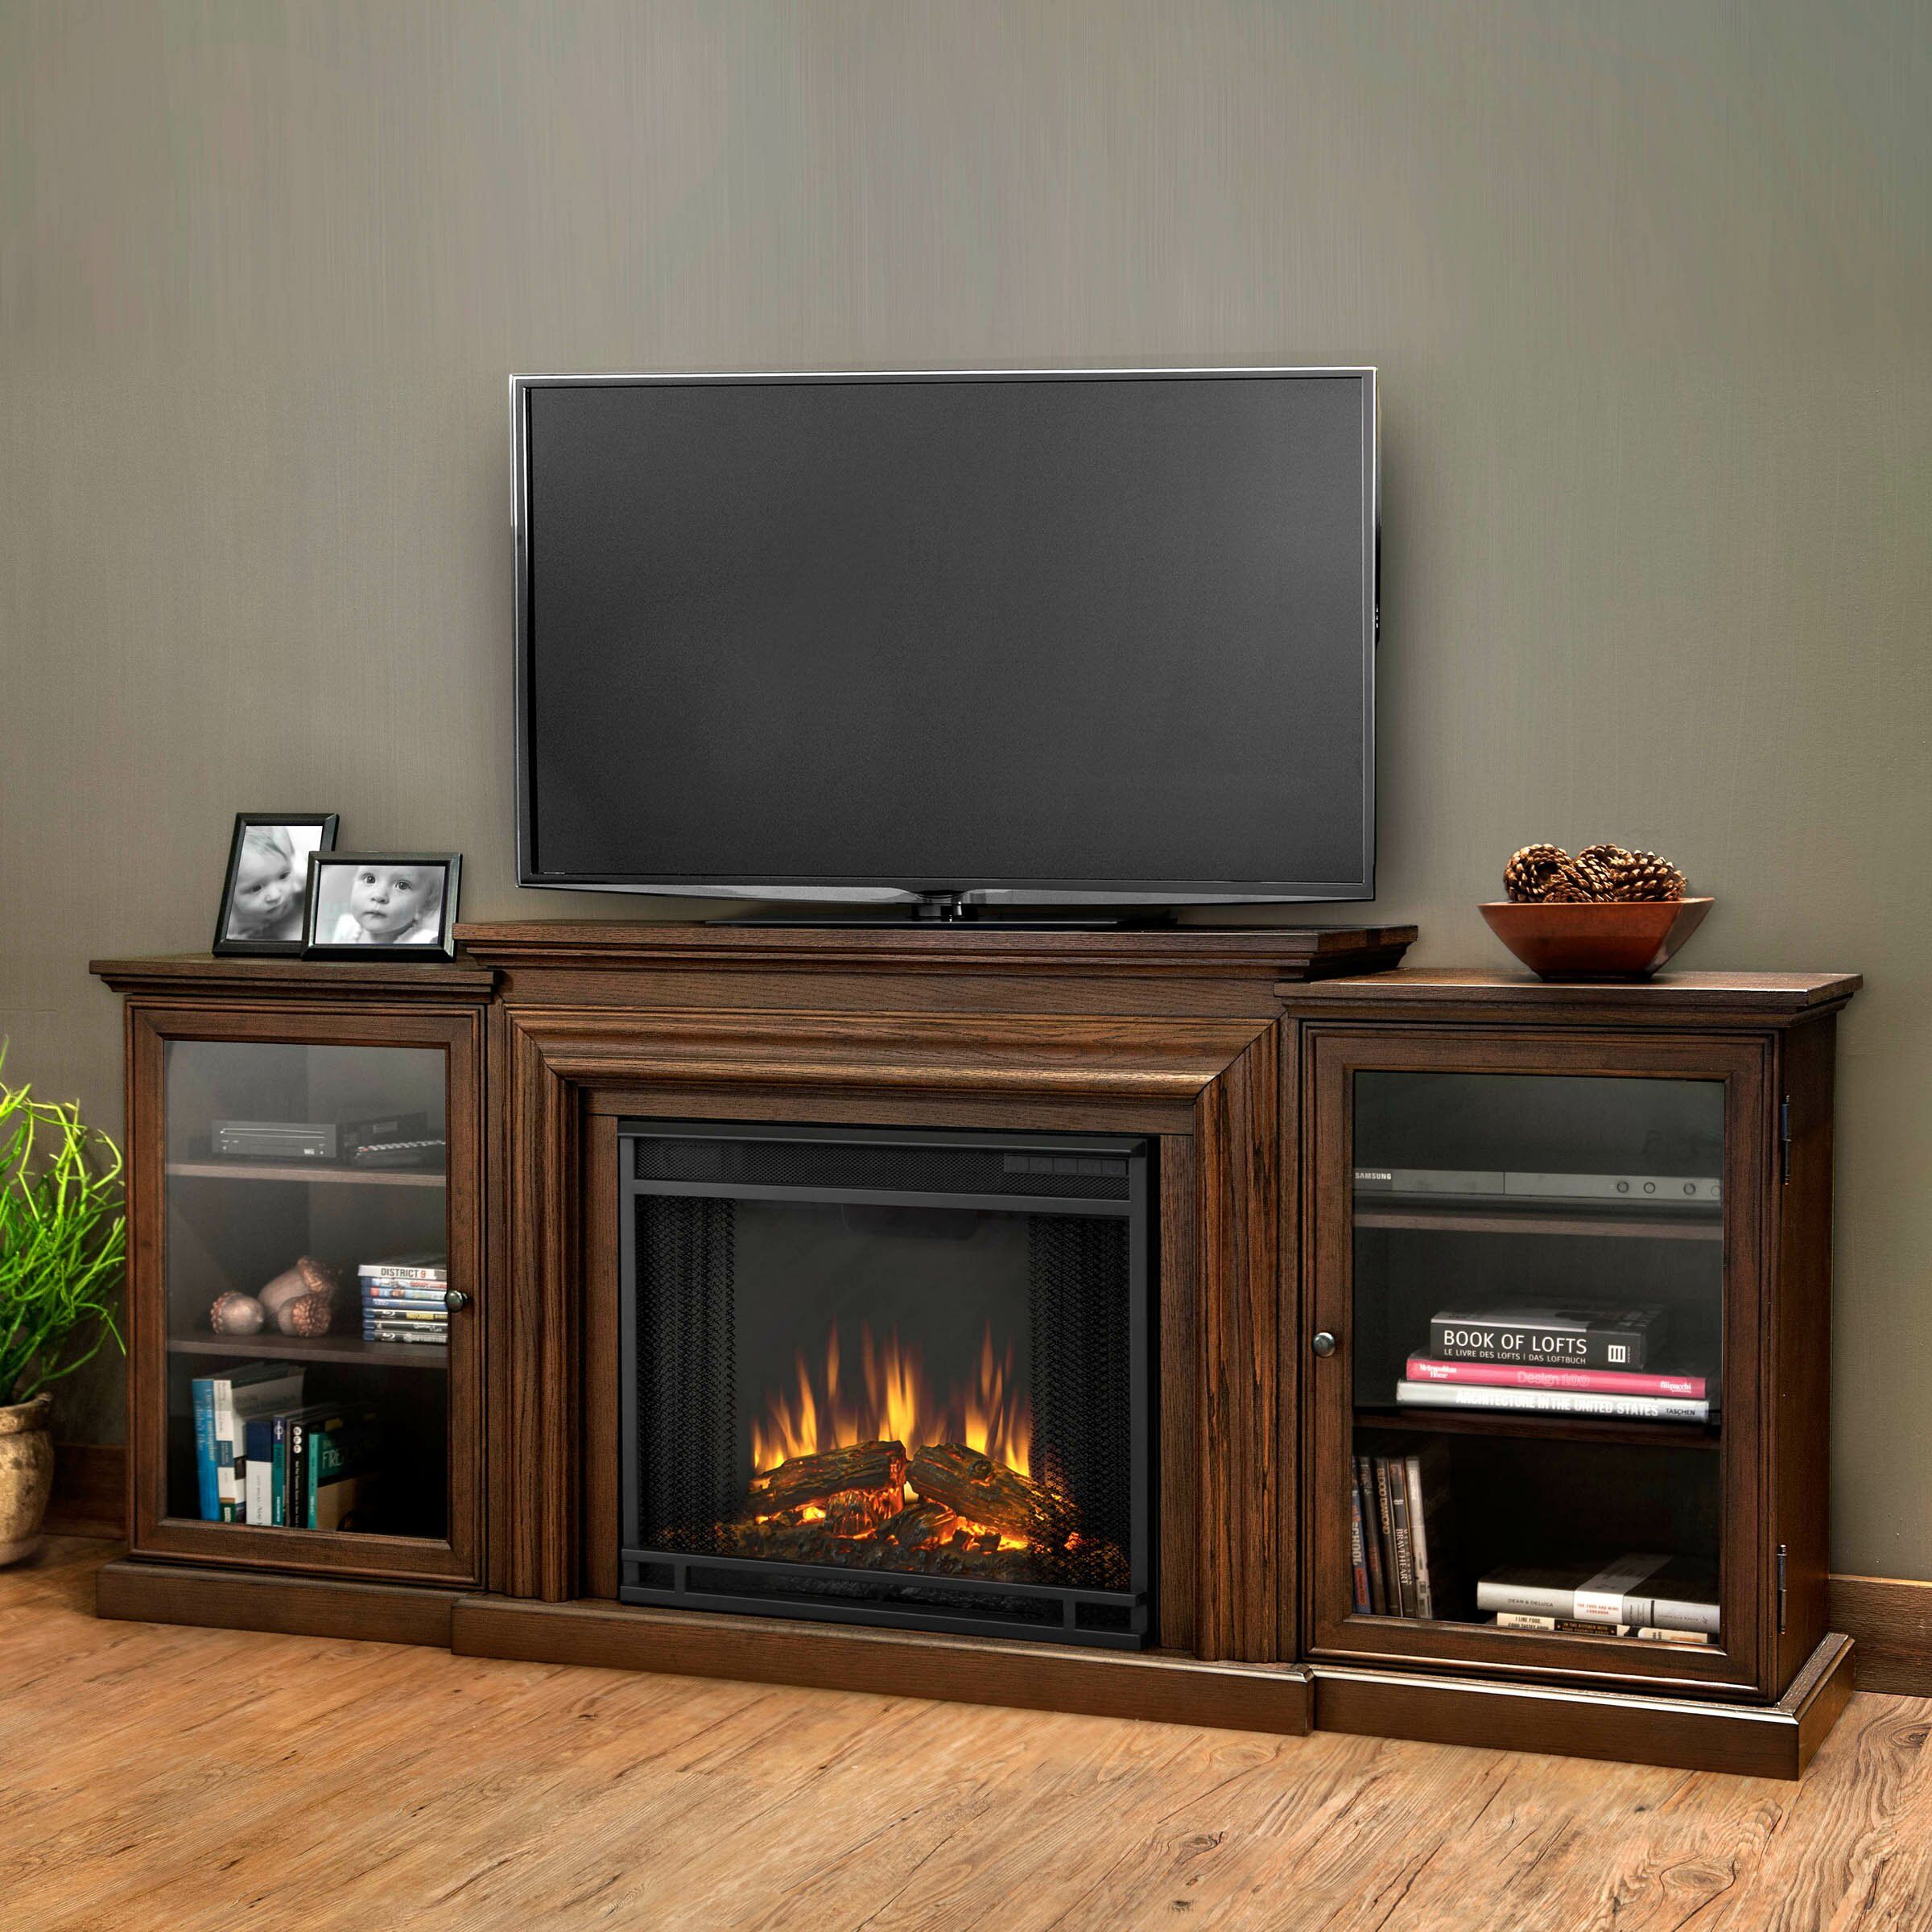 Real Flame Frederick Tv Stand With Electric Fireplace & Reviews | Wayfair Within Electric Fireplace Entertainment Centers (View 11 of 20)